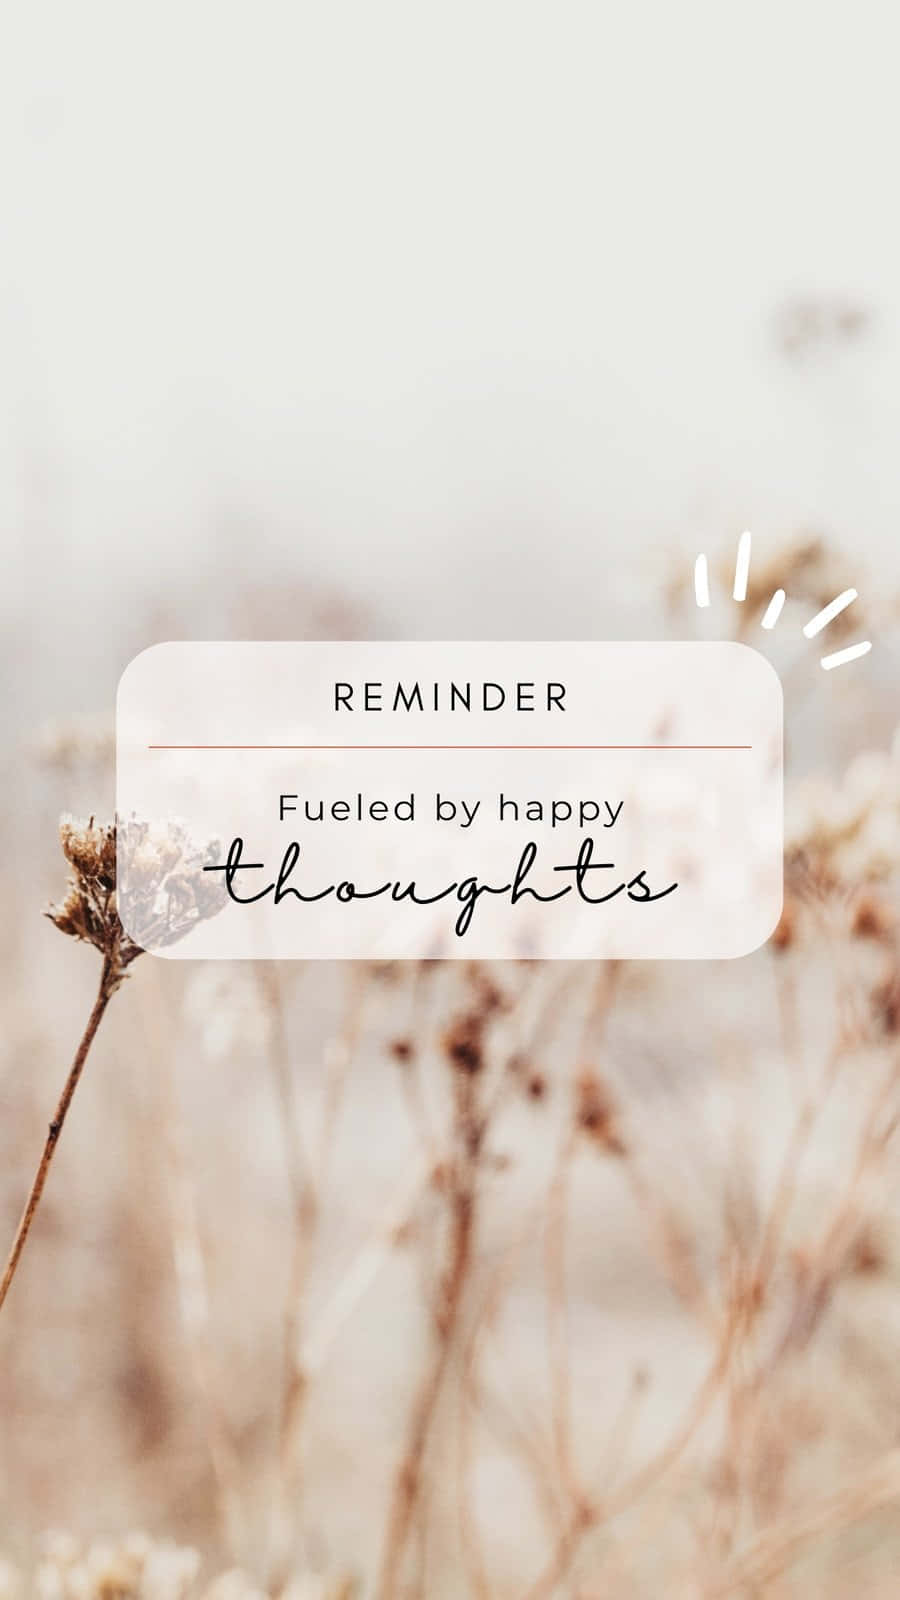 Aesthetic Reminder: A reminder to stay creative and seek inspiration from the beautiful things life has to offer. Wallpaper